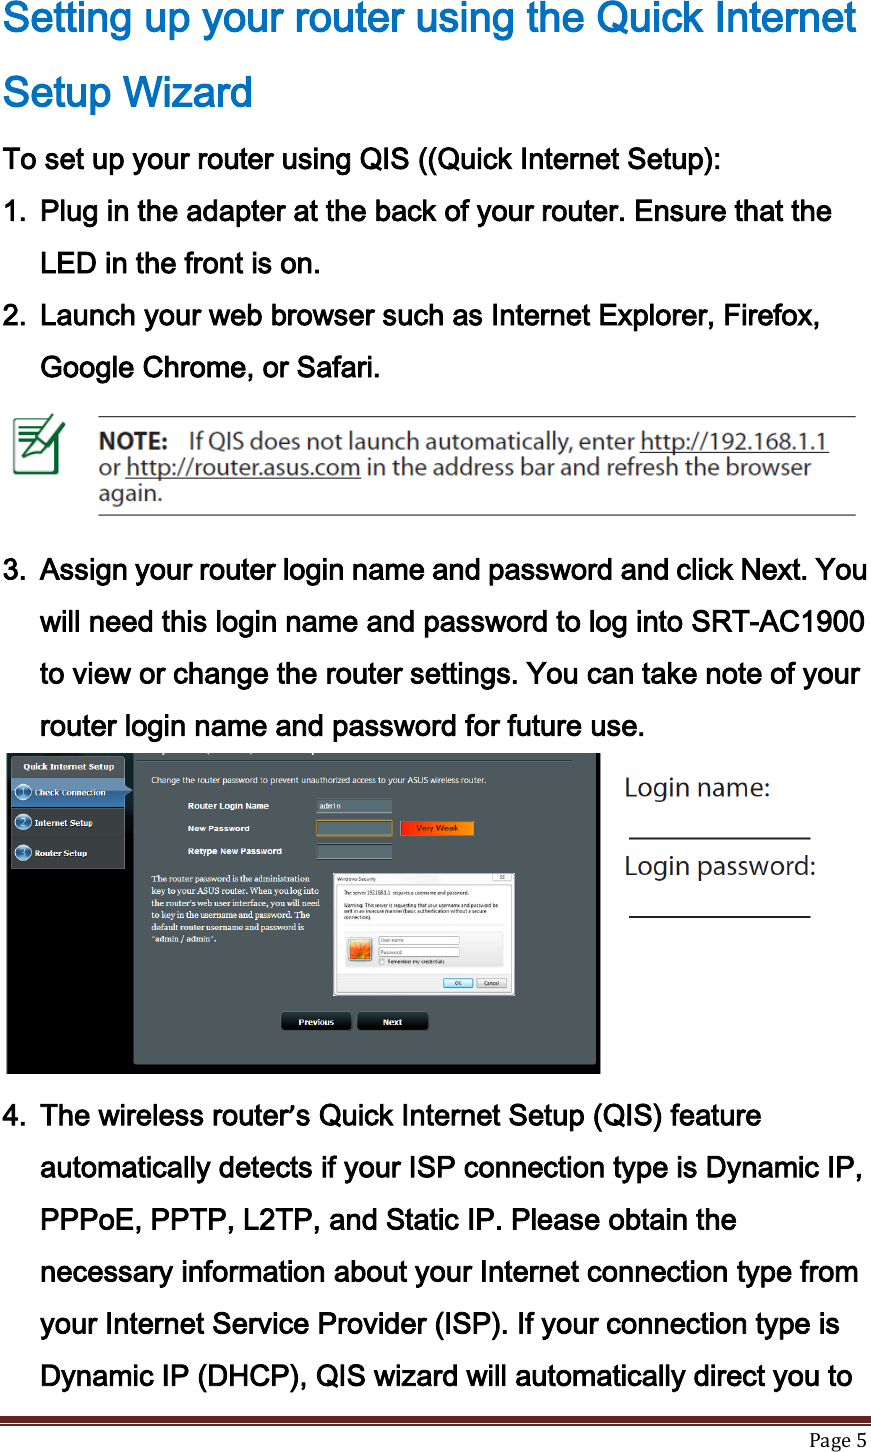   Page 5  Setting up your router using the Quick Internet Setup Wizard To set up your router using QIS ((Quick Internet Setup): 1. Plug in the adapter at the back of your router. Ensure that the LED in the front is on. 2. Launch your web browser such as Internet Explorer, Firefox, Google Chrome, or Safari.  3. Assign your router login name and password and click Next. You will need this login name and password to log into SRT-AC1900 to view or change the router settings. You can take note of your router login name and password for future use.  4. The wireless router’s Quick Internet Setup (QIS) feature automatically detects if your ISP connection type is Dynamic IP, PPPoE, PPTP, L2TP, and Static IP. Please obtain the necessary information about your Internet connection type from your Internet Service Provider (ISP). If your connection type is Dynamic IP (DHCP), QIS wizard will automatically direct you to 